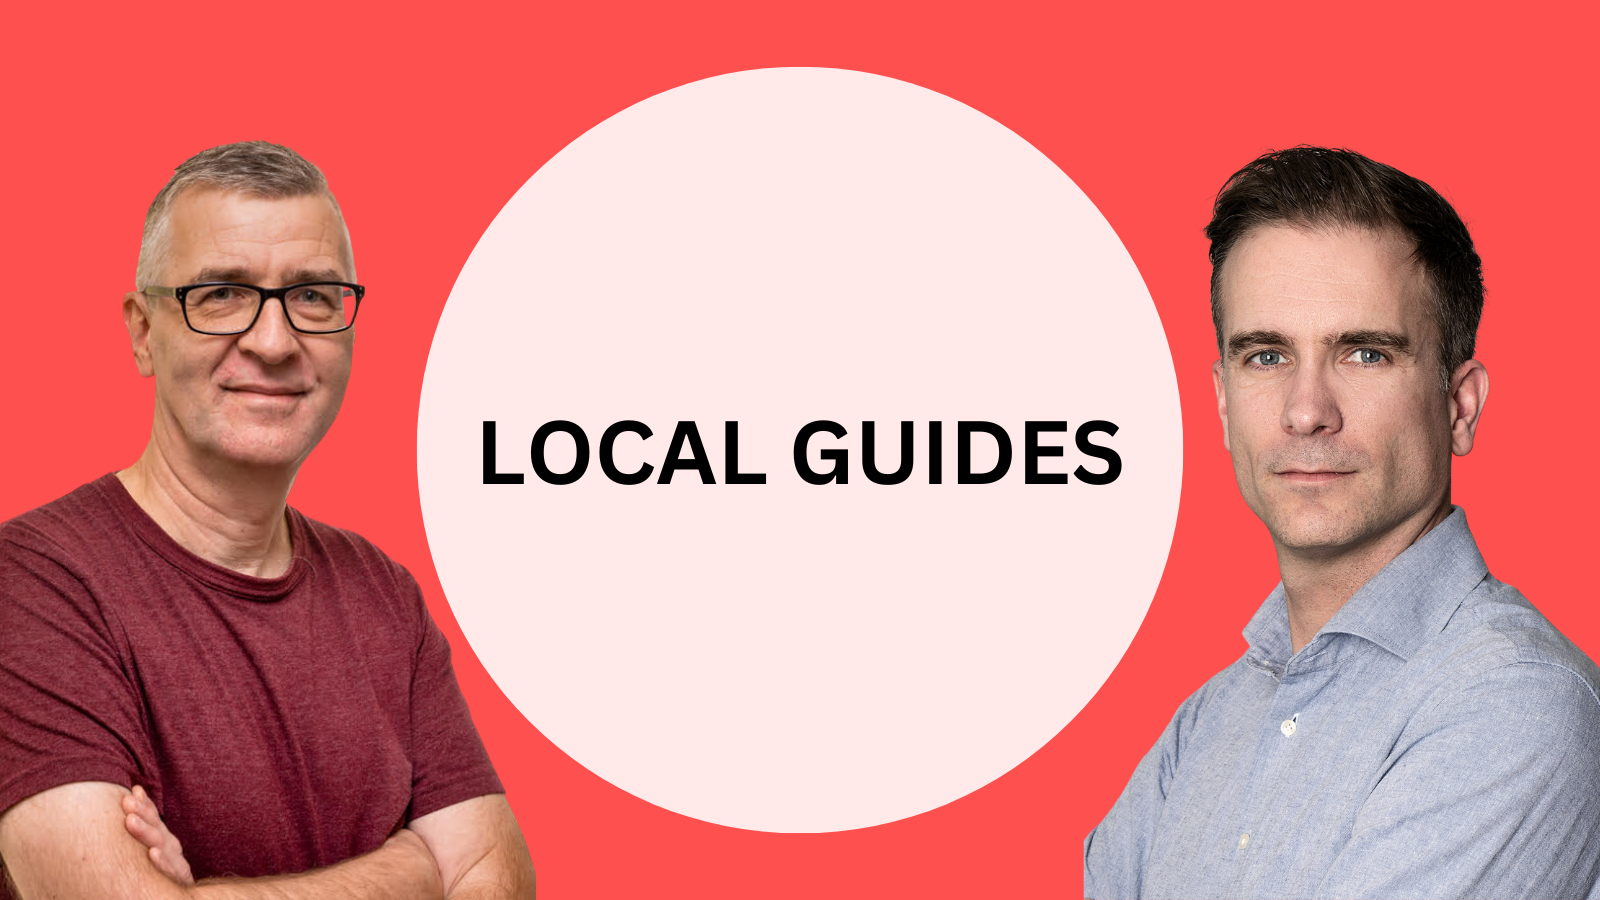 What are local guides on the Google Maps Platform?